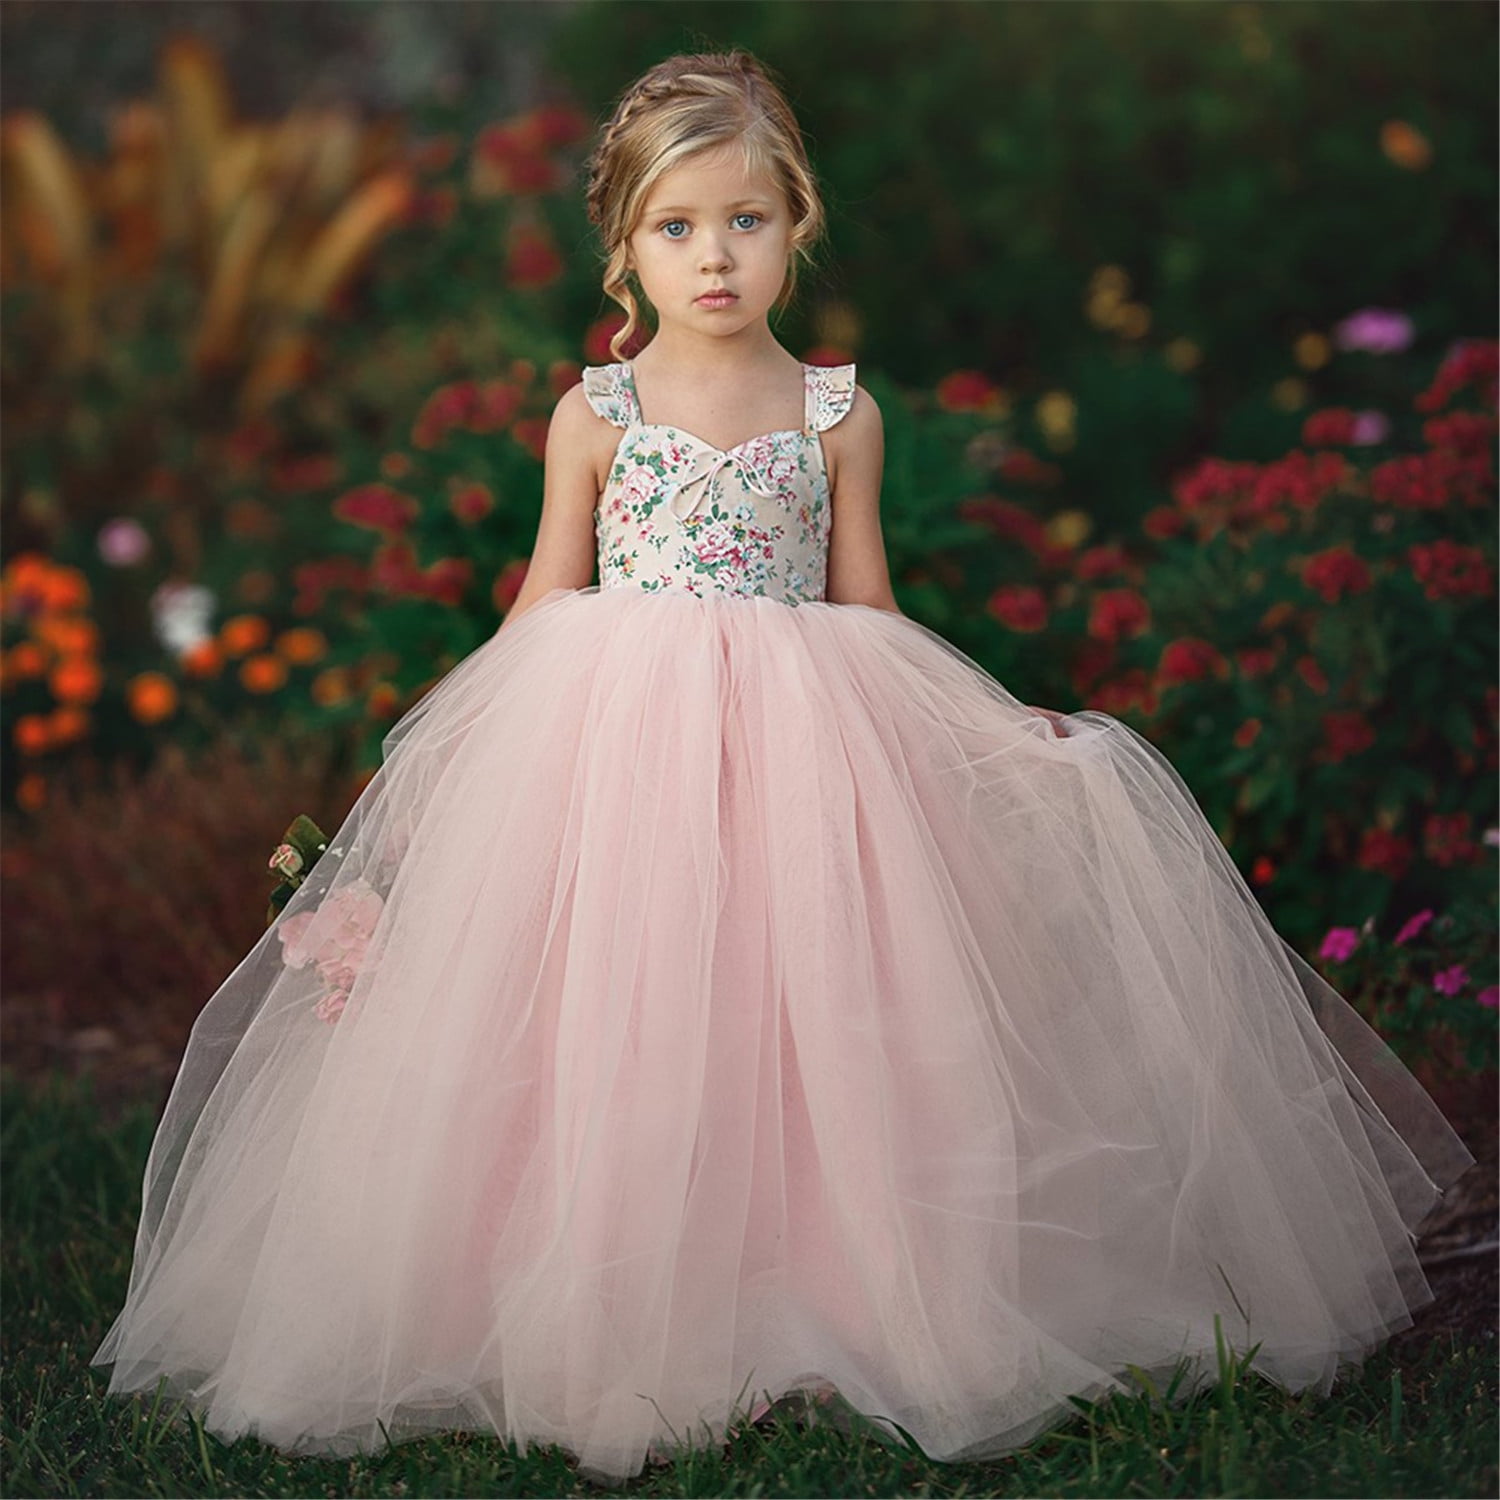 fcity.in - Dresty Dresty Stylish Gown Gownsformal Gowns For Princess Gowns  For